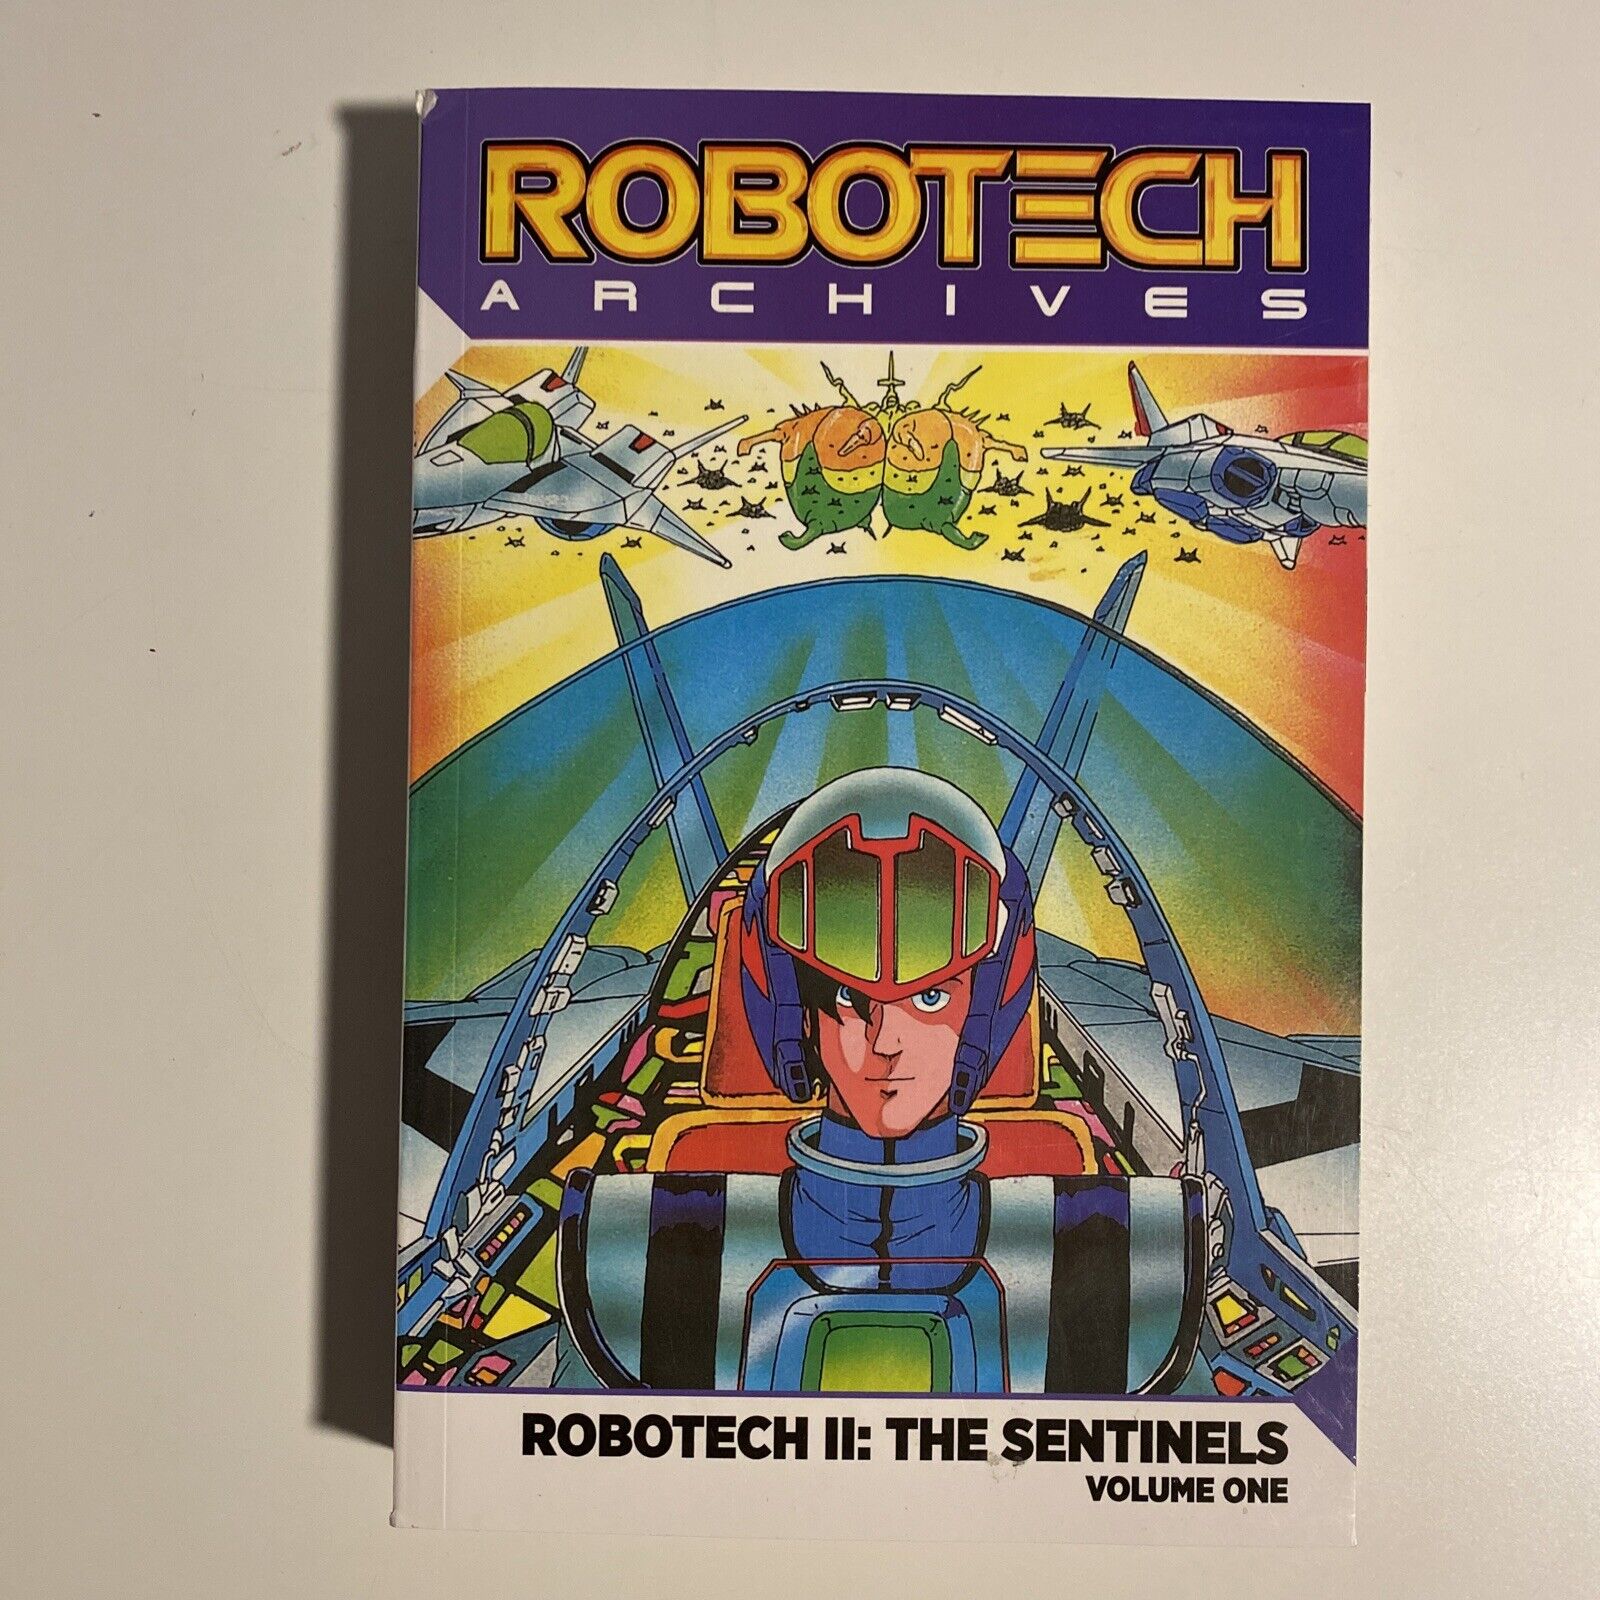 Robotech II: The Sentinels Volume 1, Robotech Archives, #50, Great Condition.